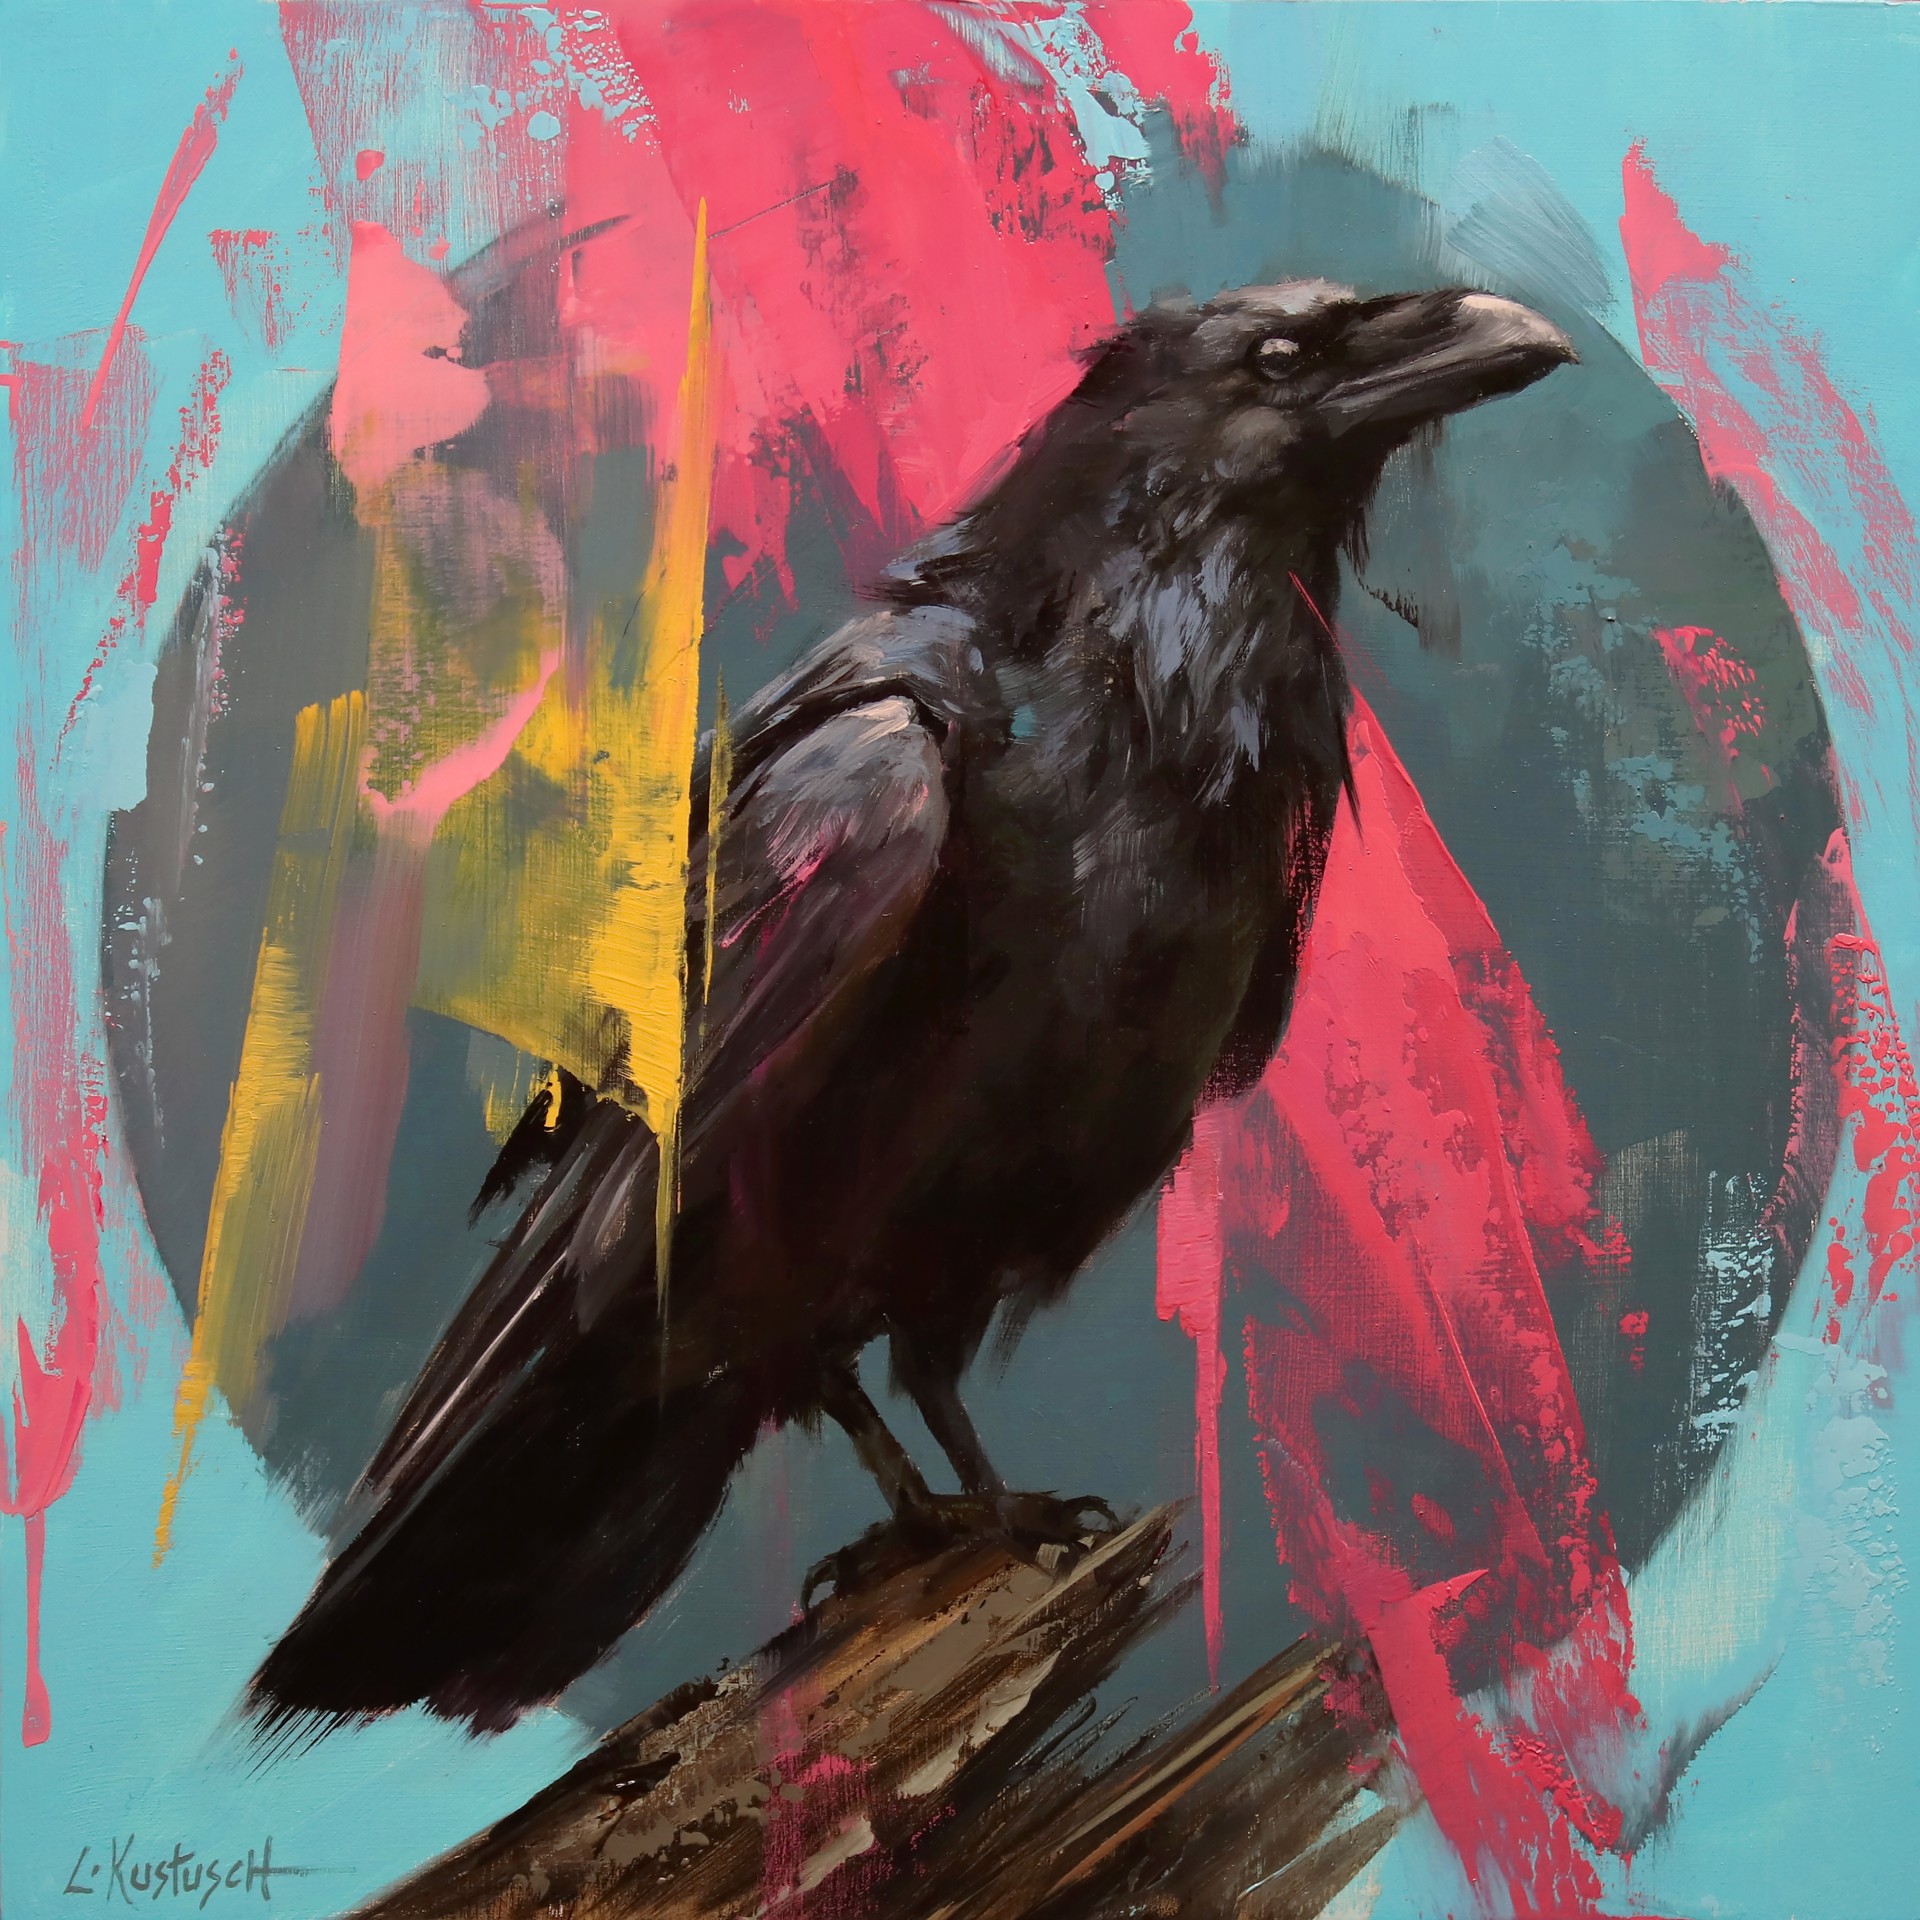 The Raven on Shades of Turquoise by Lindsey Kustusch